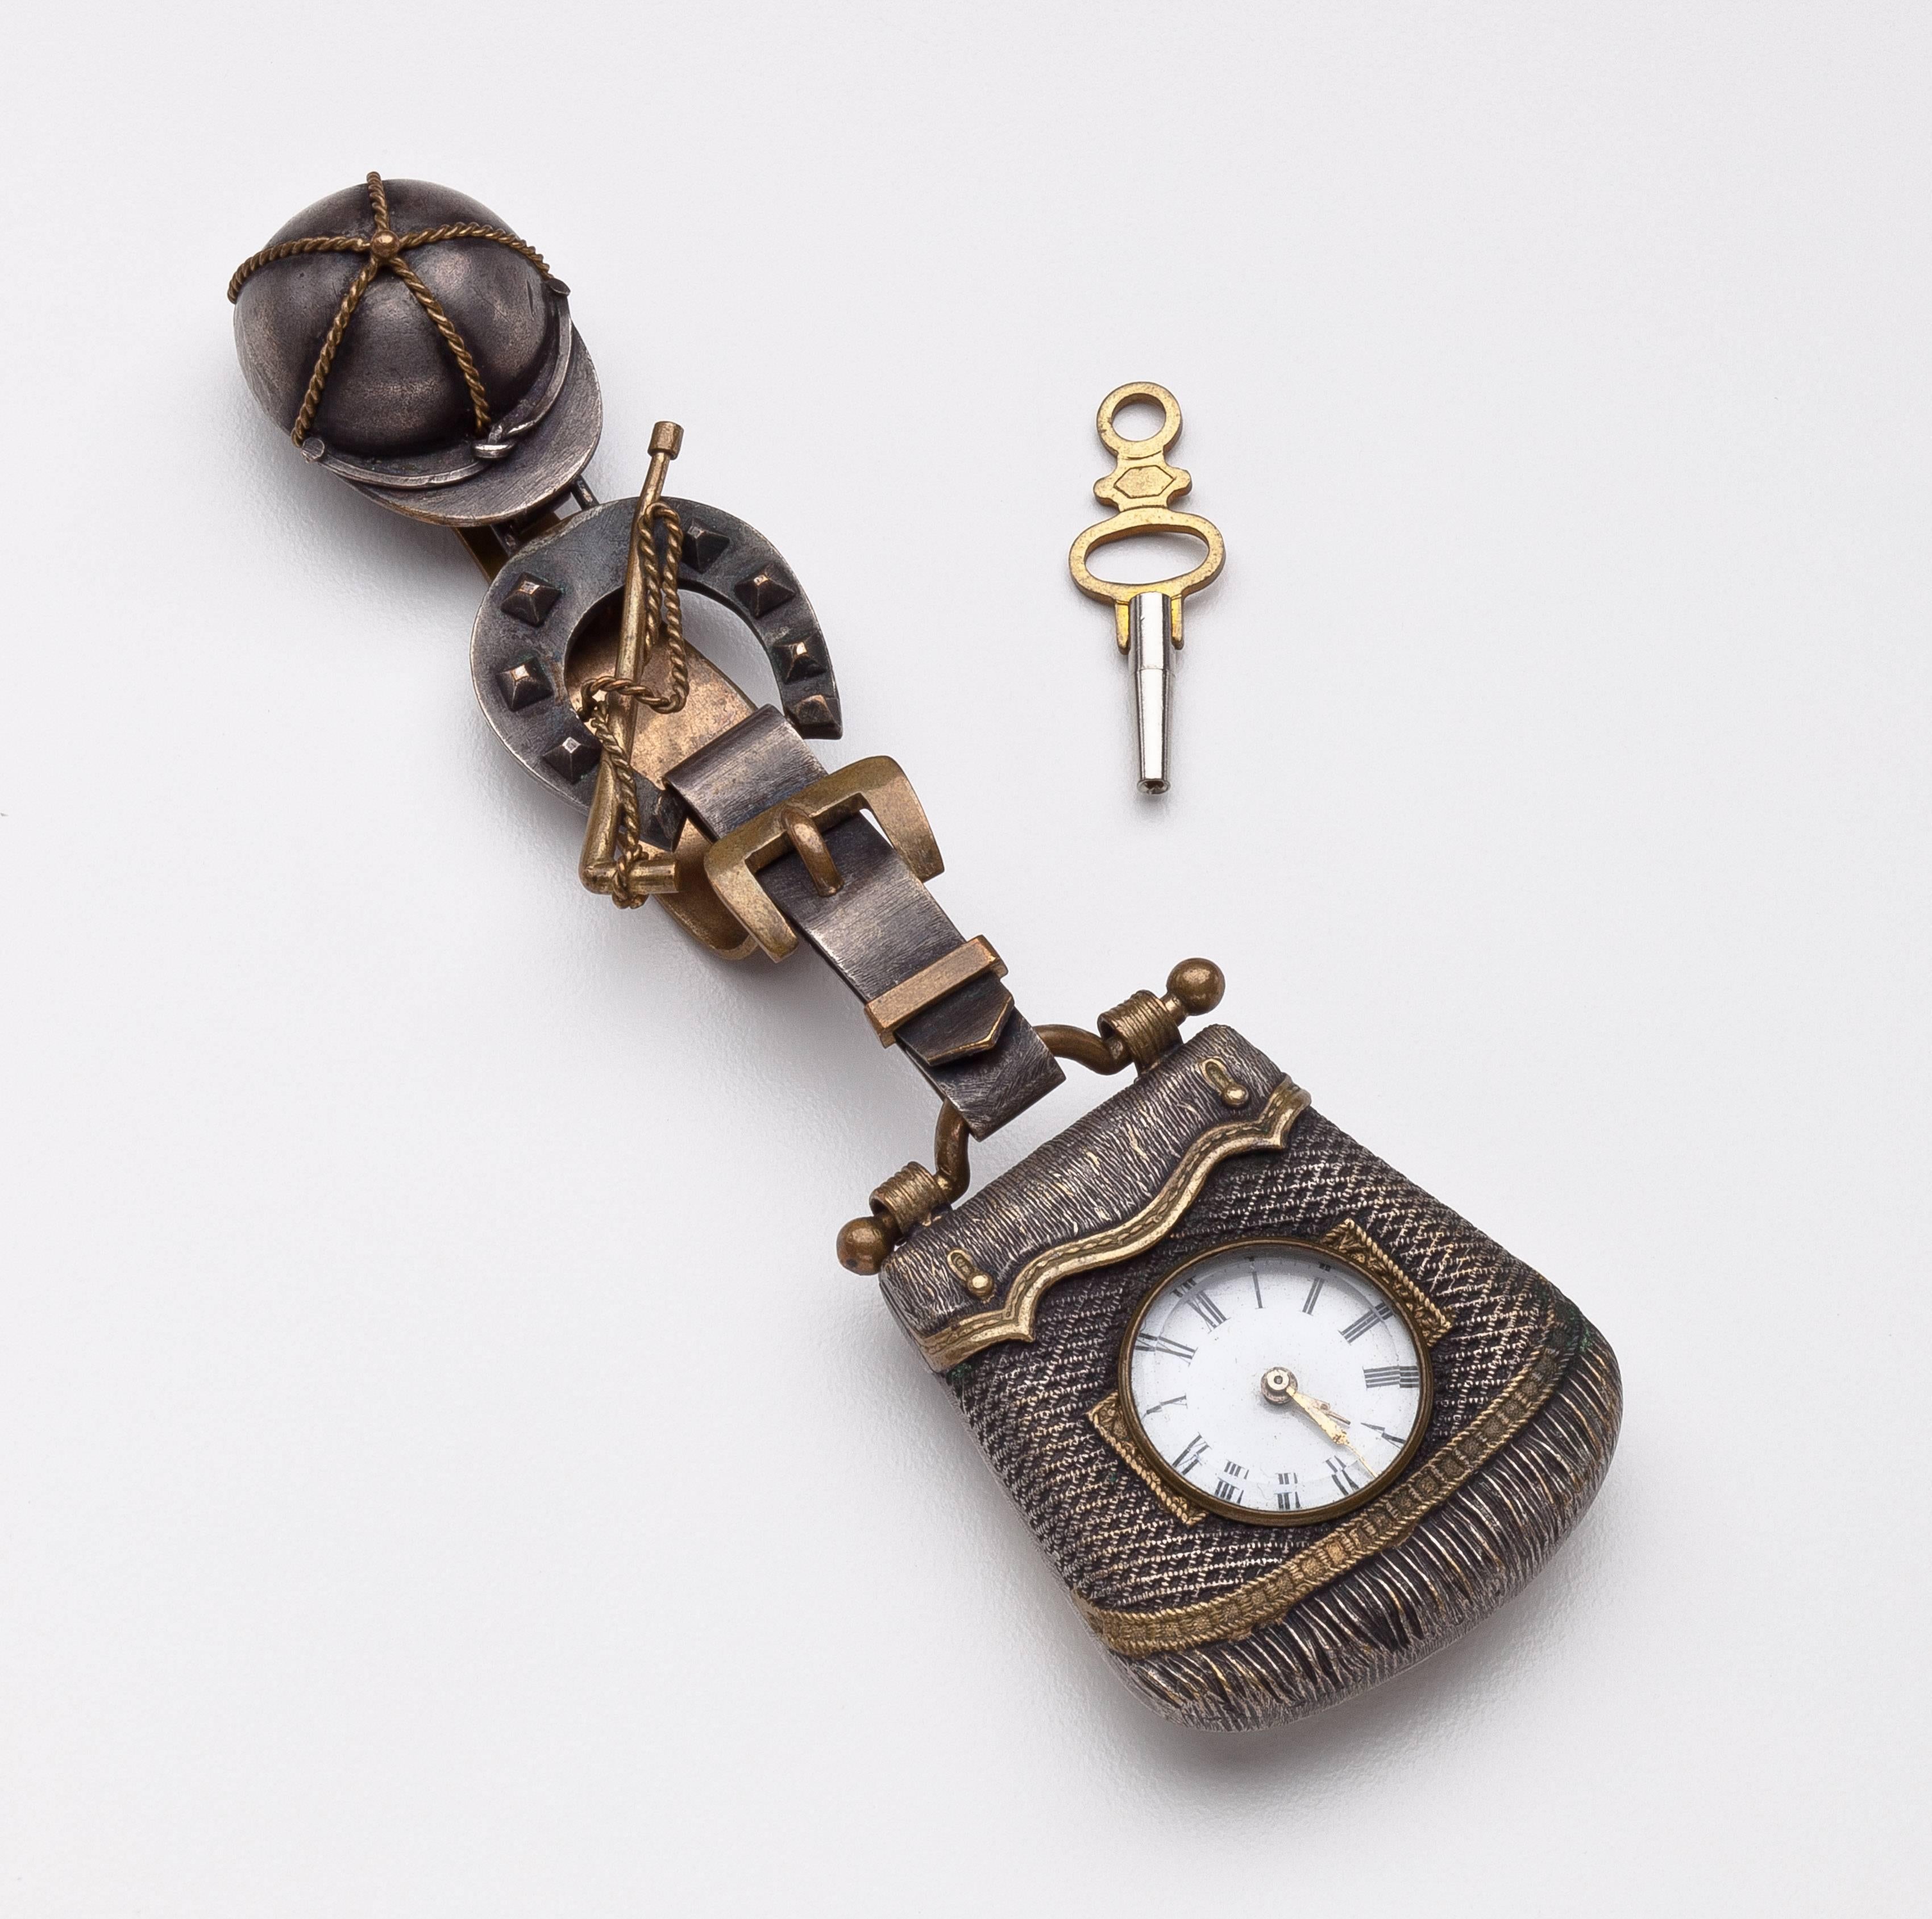 Victorian Key-wound watch with equestrian-style case and chatelaine. Mid-19th century watch with cylinder movement has porcelain dial with Roman numerals. The gun-metal and brass chatelaine case composed of several elements: saddle bag with watch,